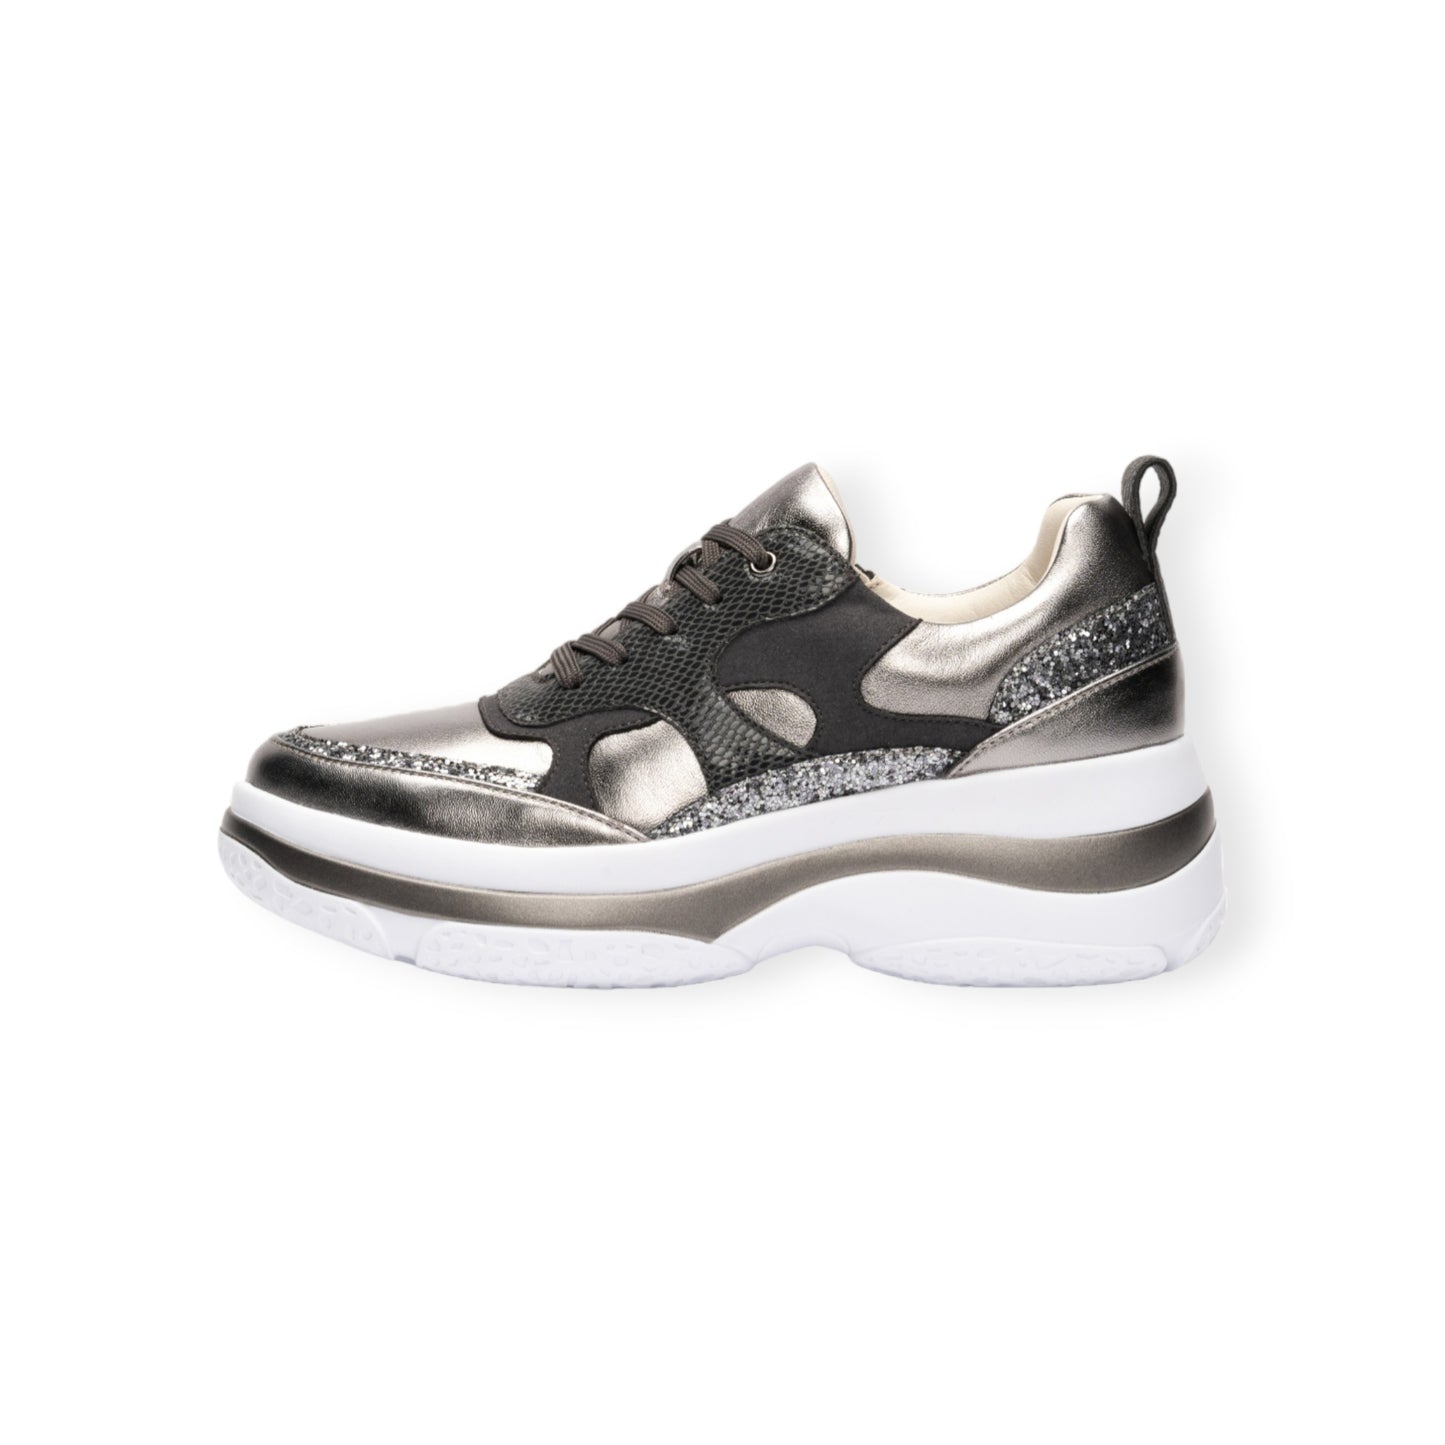 Sheepskin voluminous outsole dad sneakers with glitter and zippers  #FJ077